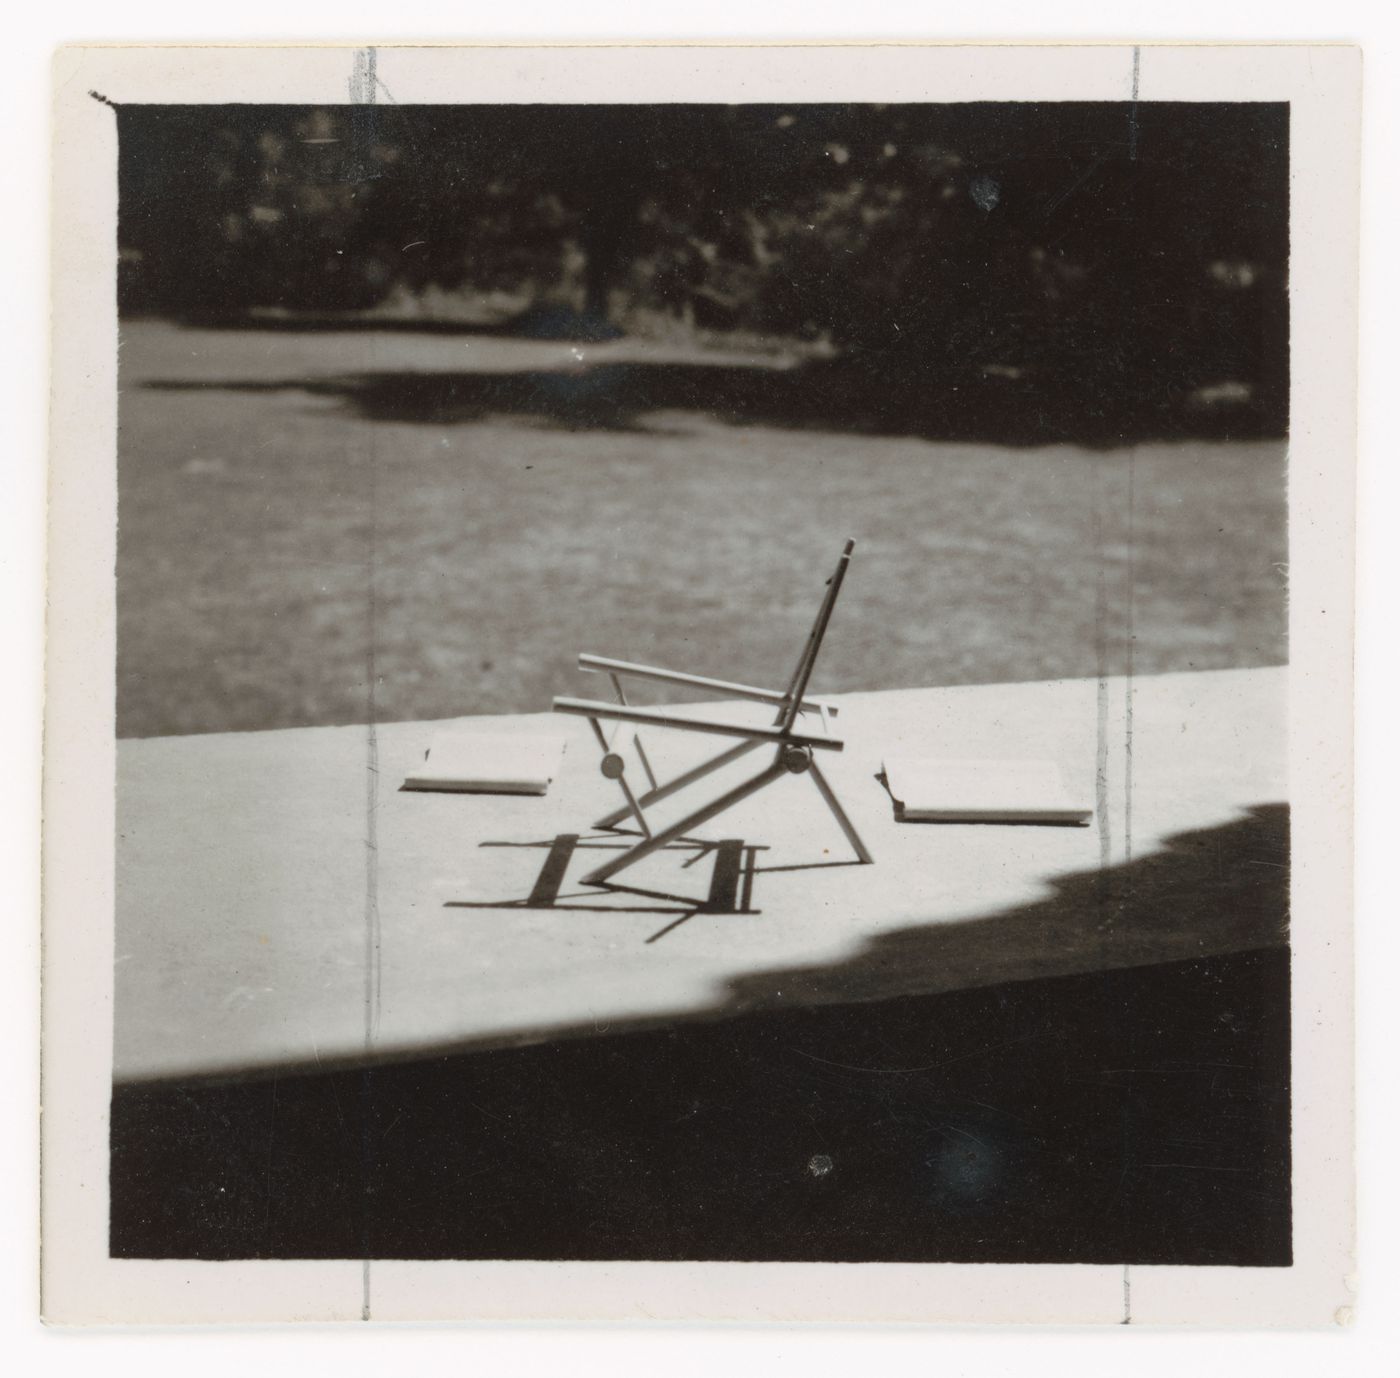 View of a wood structure for a chair possibly designed by Pierre Jeanneret, Chandigarh, India